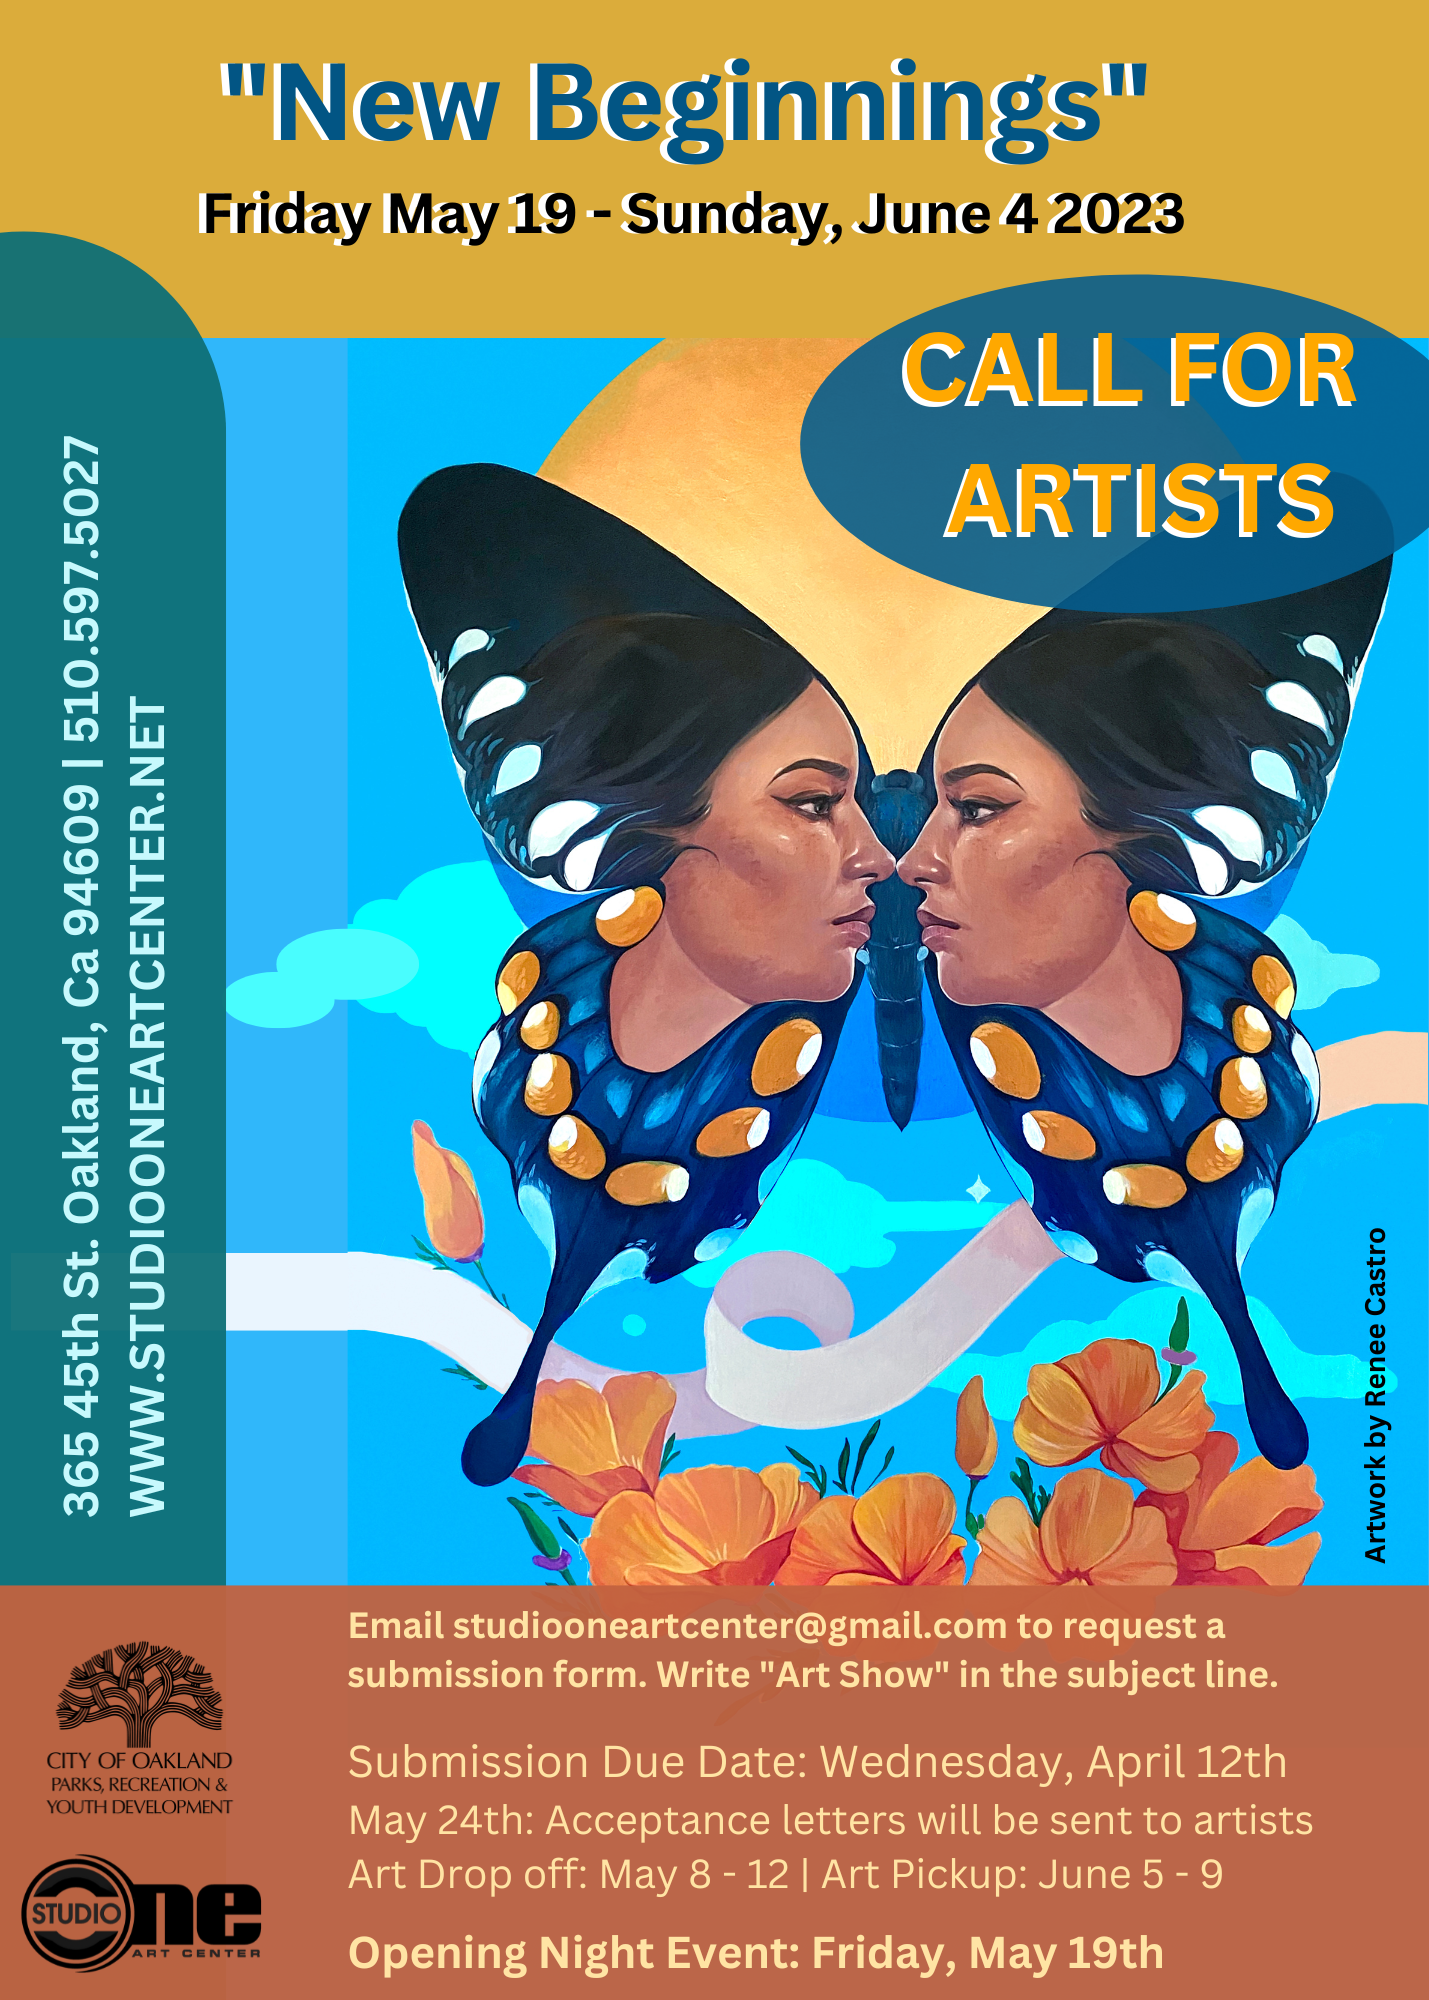 CALL FOR ARTISTS Image